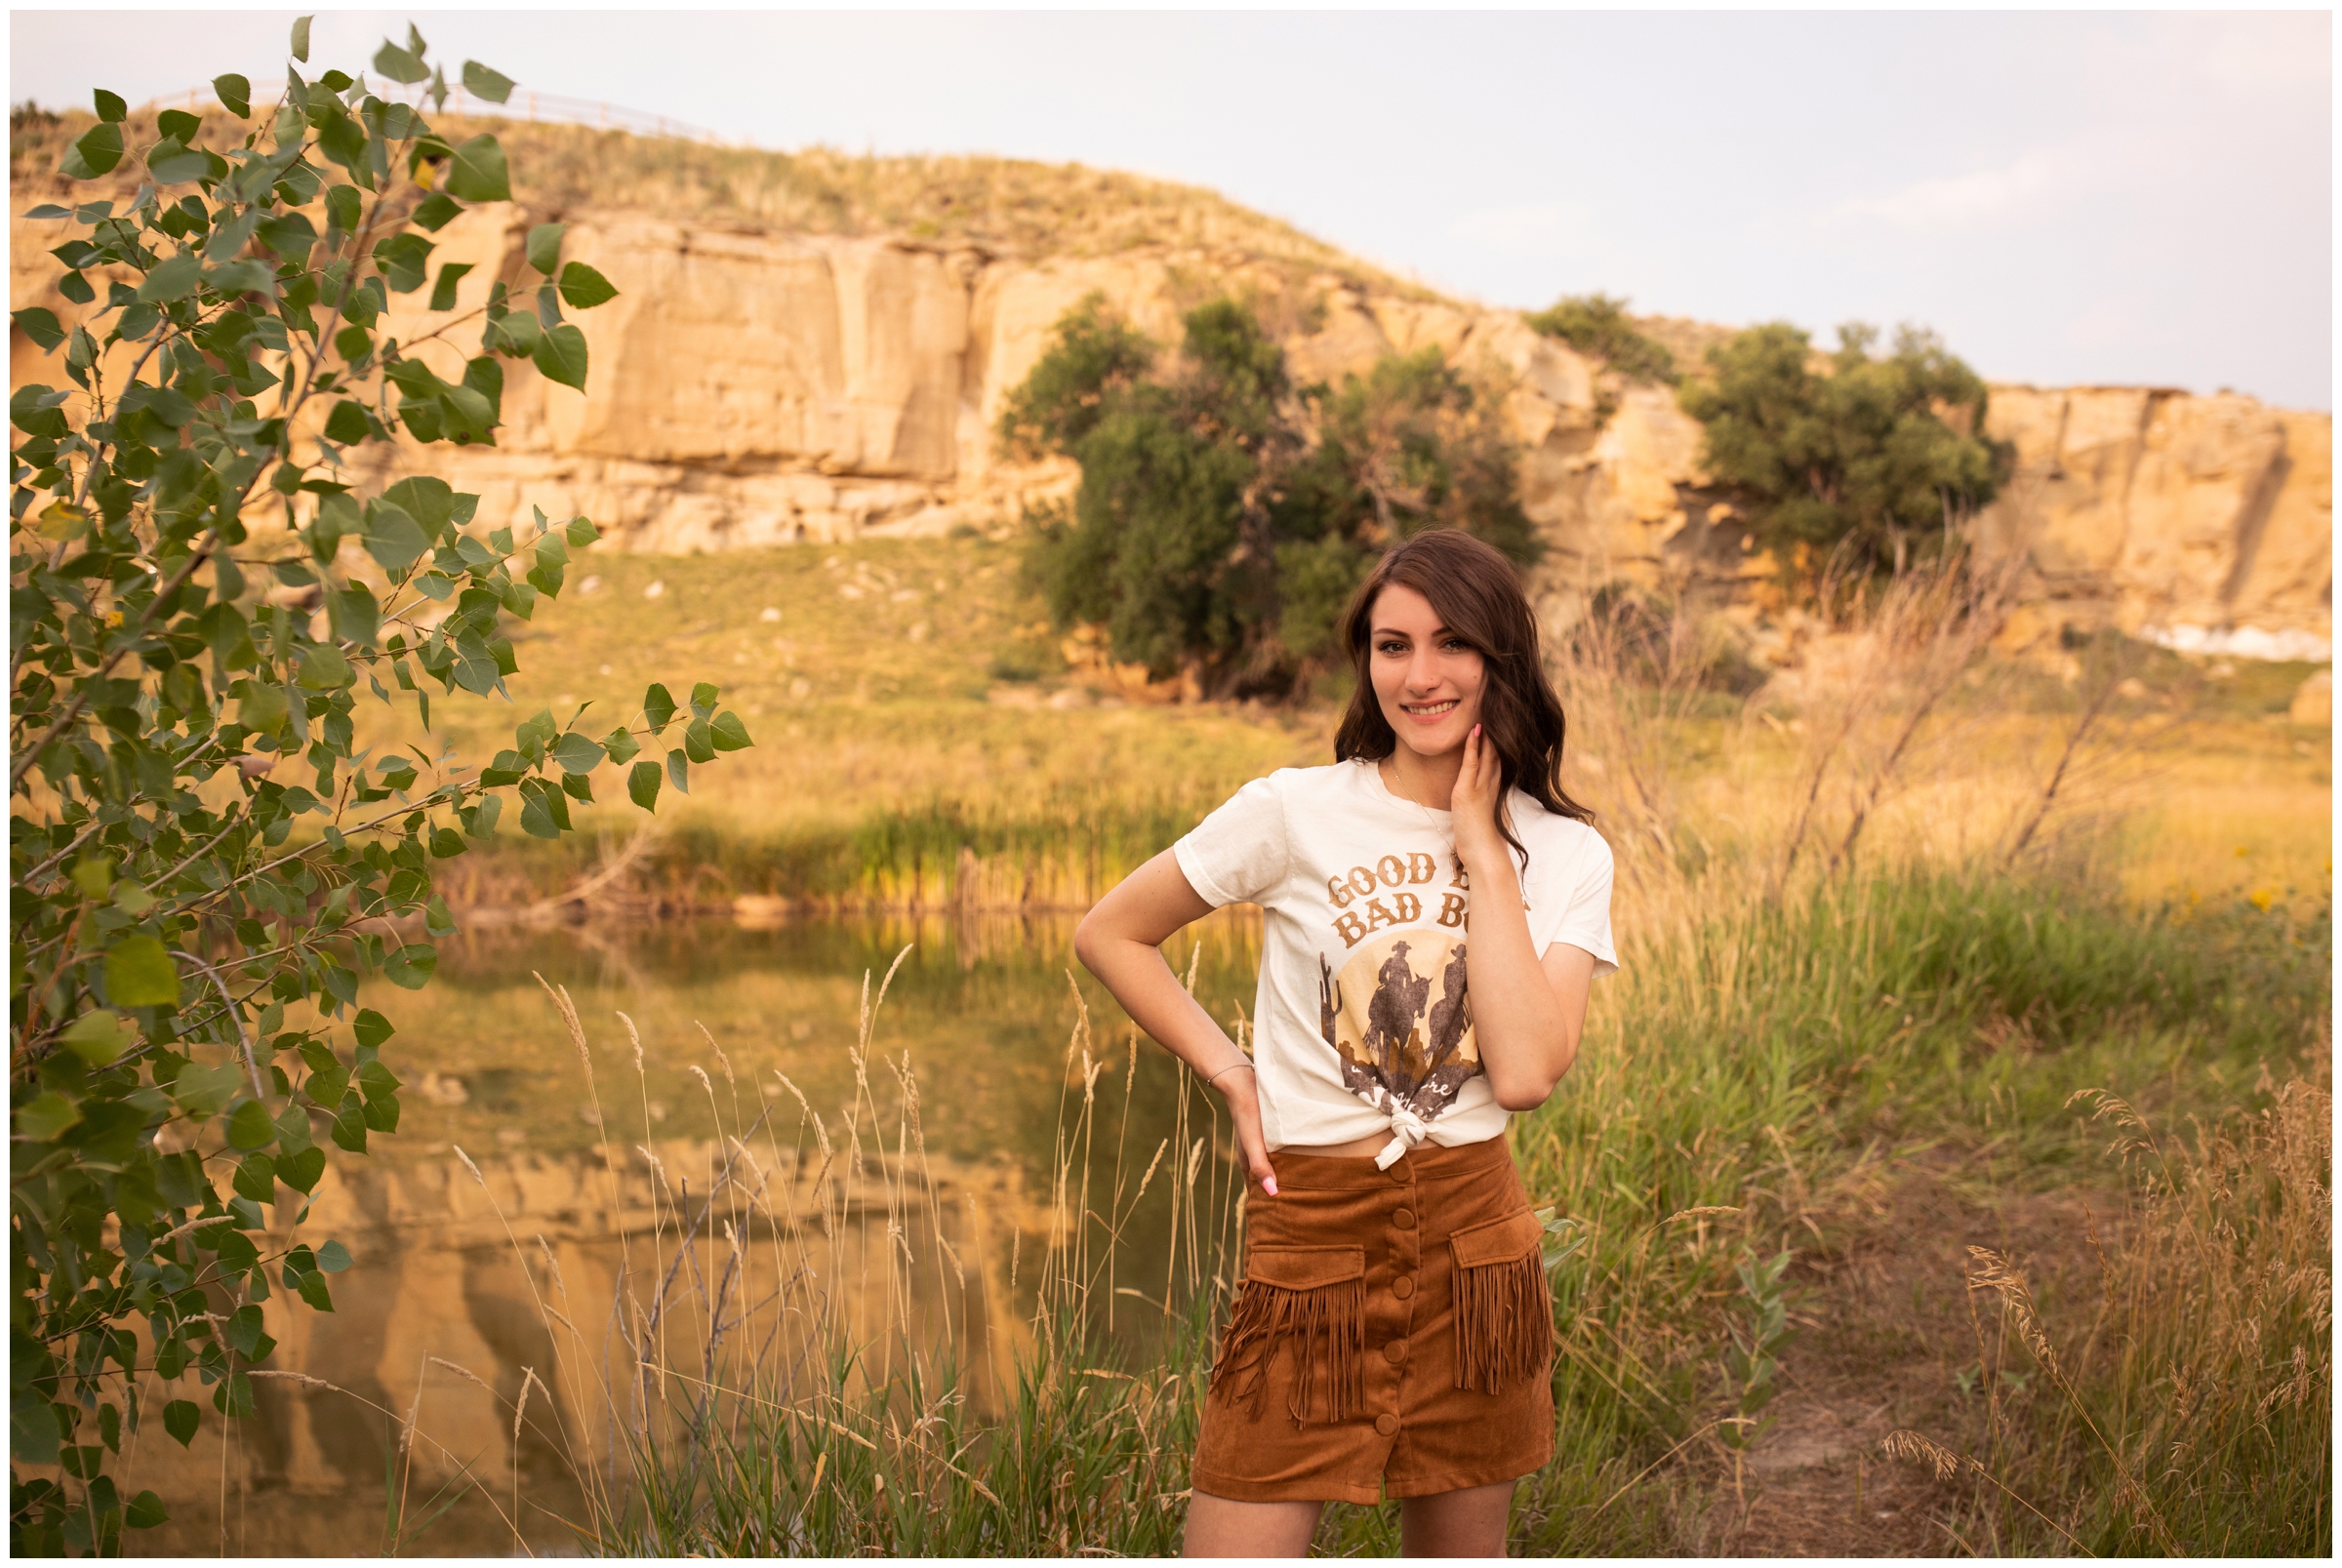 Teen posing with rock cliffs in background at sandstone ranch Colorado 